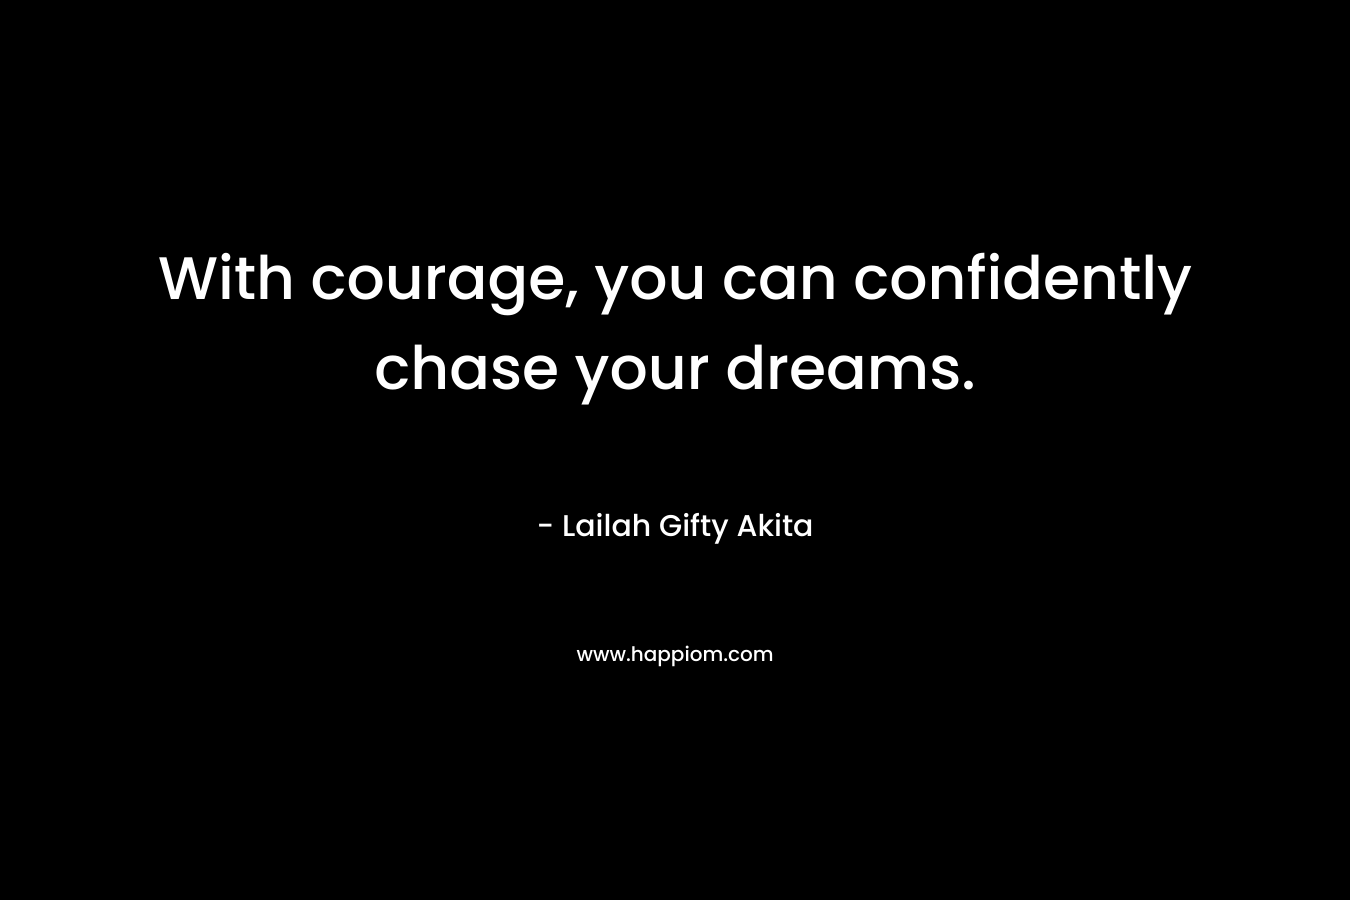 With courage, you can confidently chase your dreams.